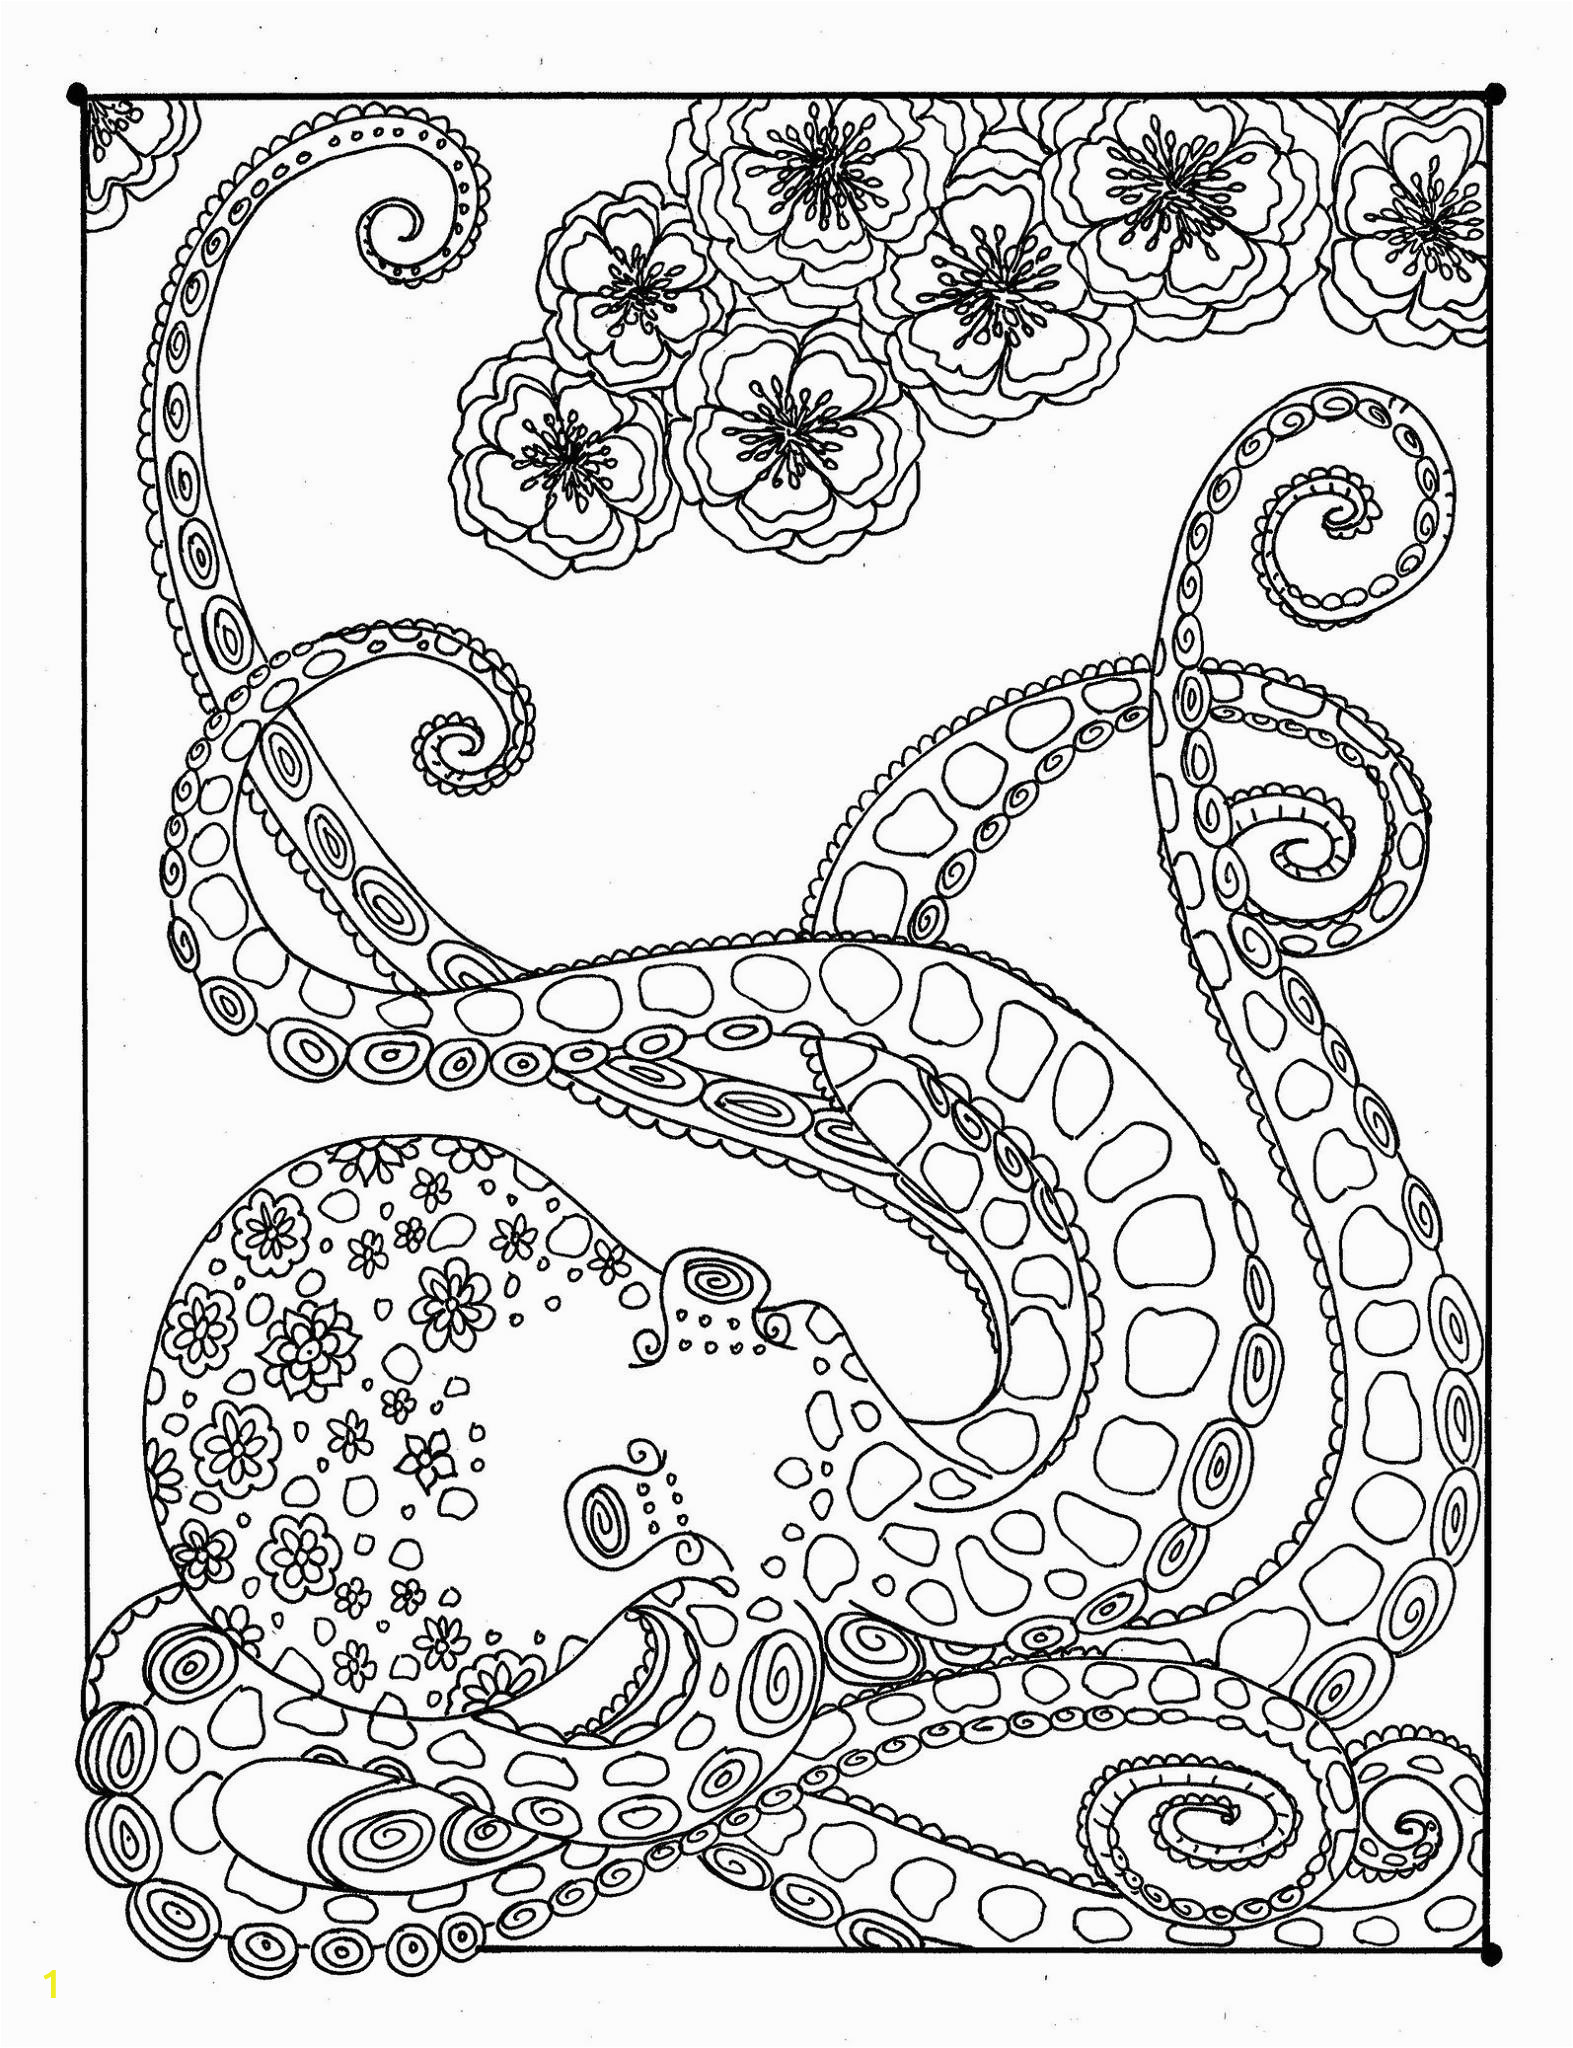 Abstract Coloring Pages for Adults to Print Free Printable Abstract Coloring Pages for Adults